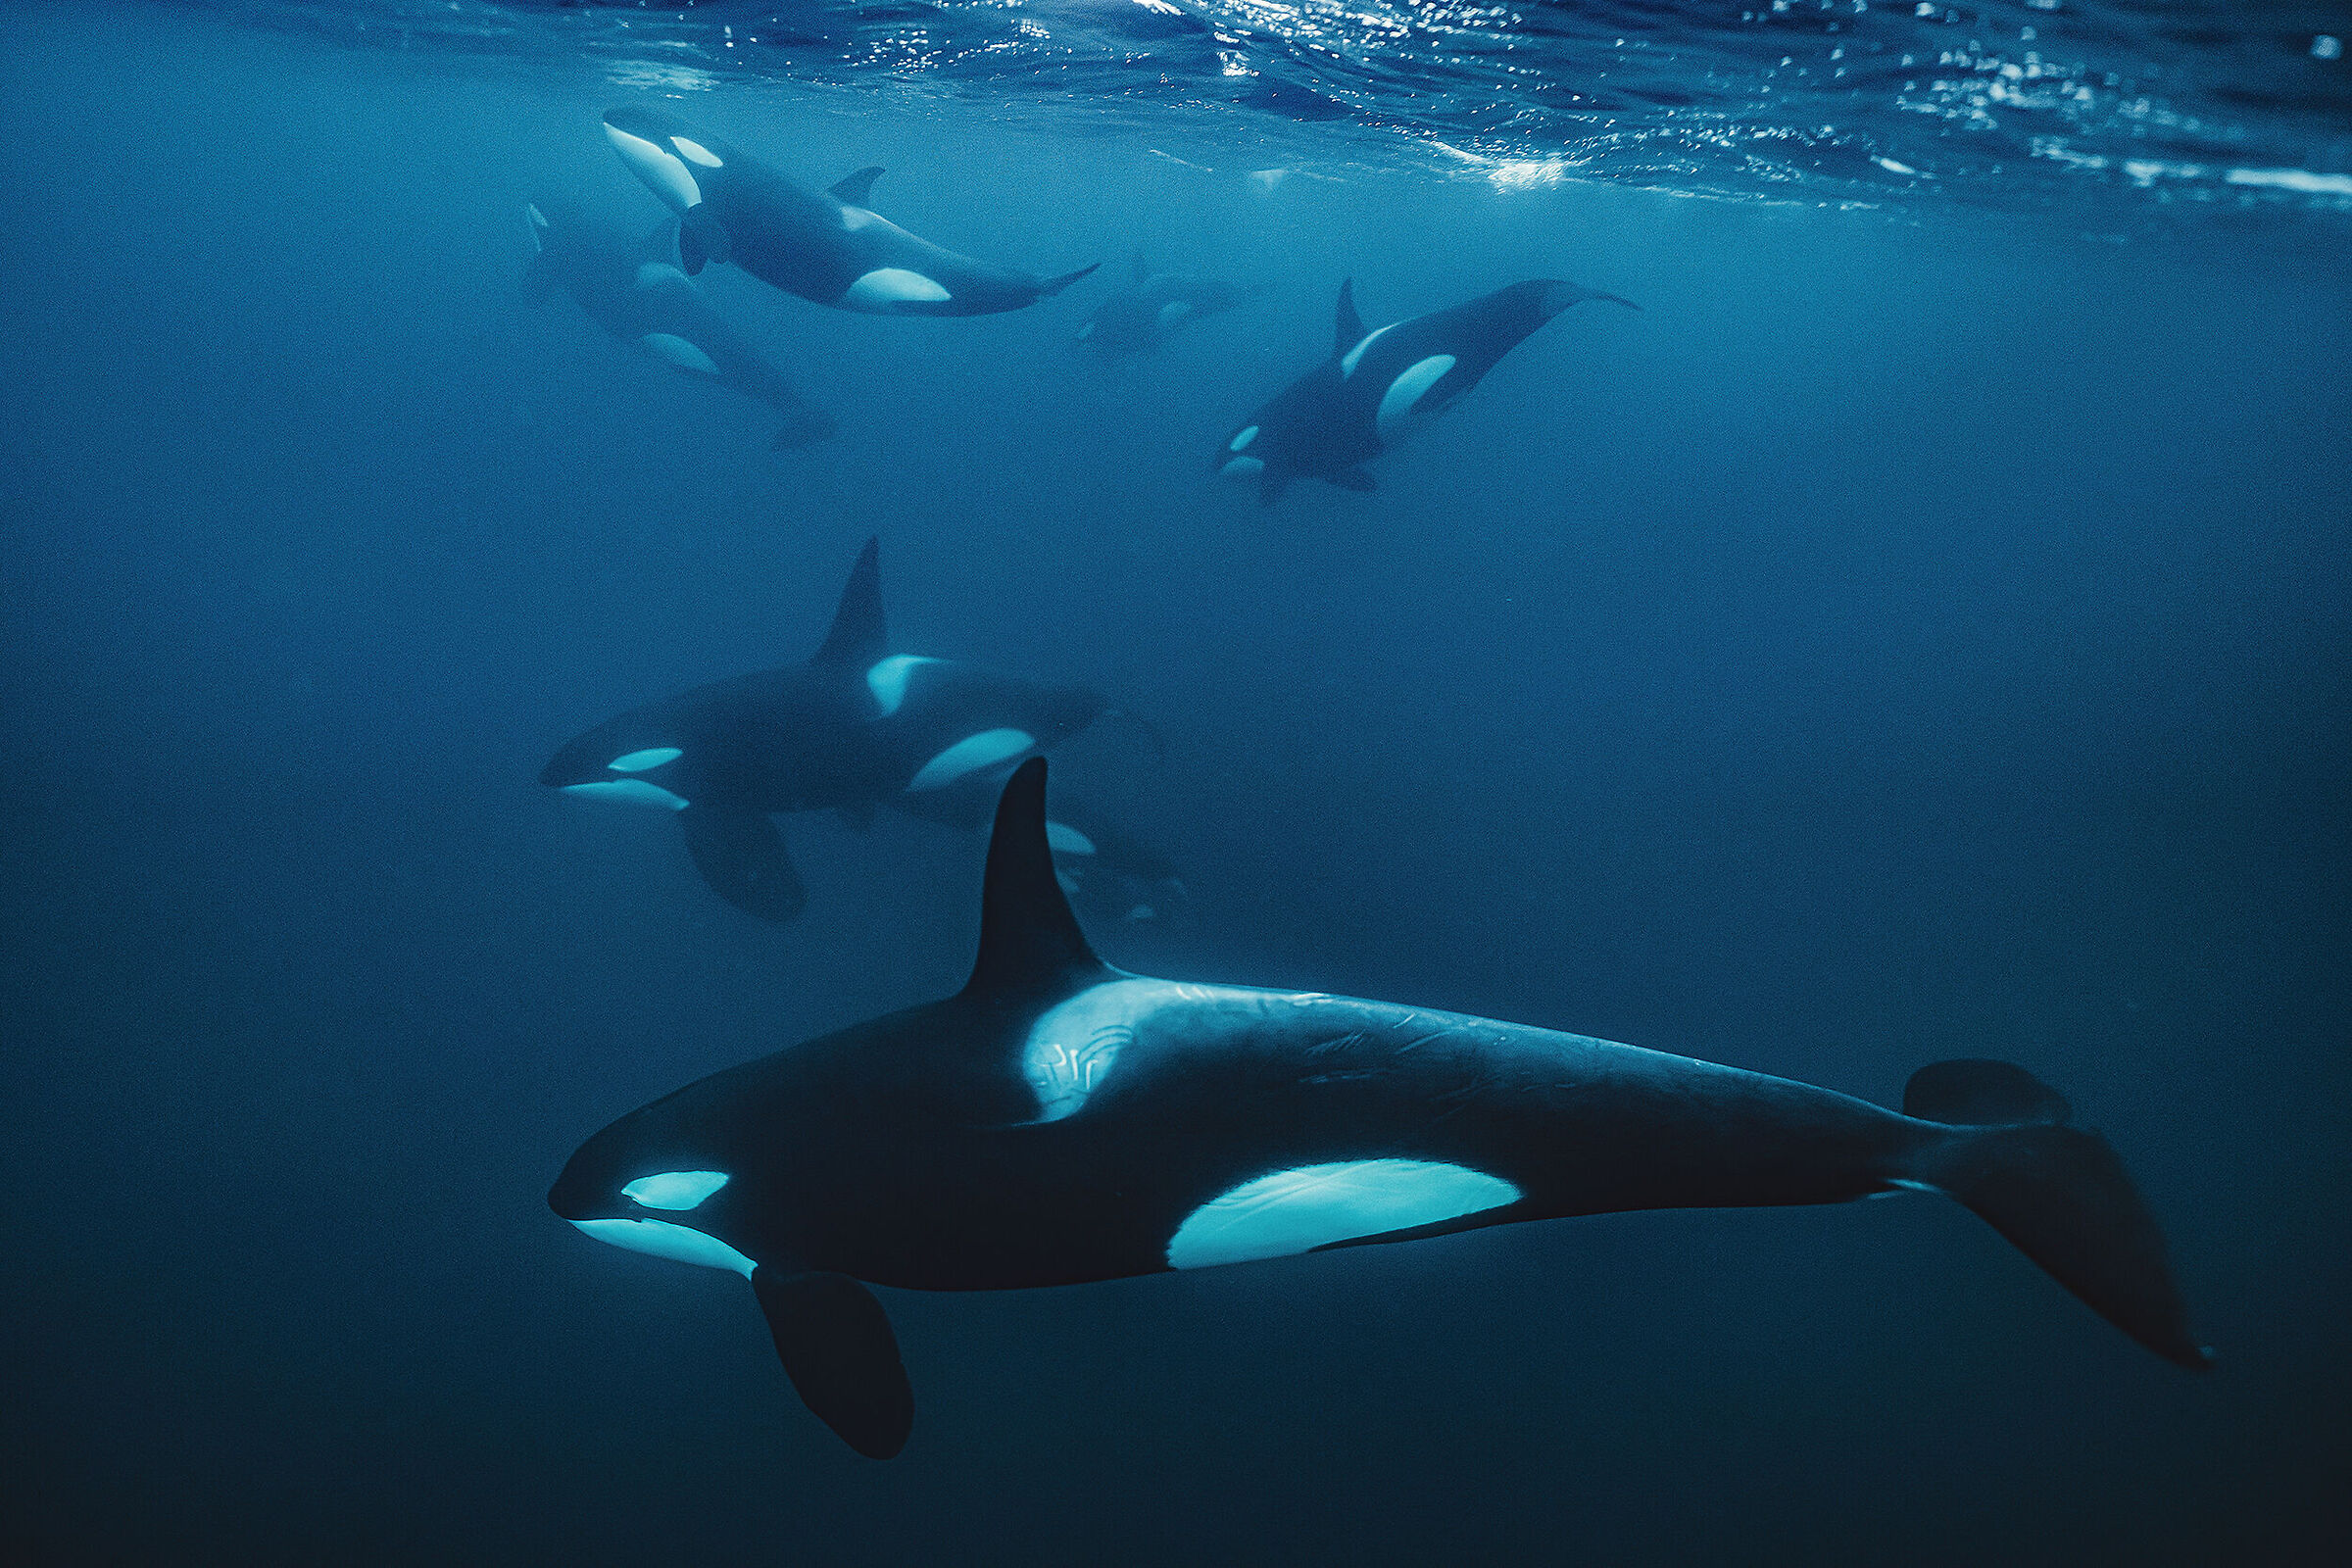 Killer whales in motion...